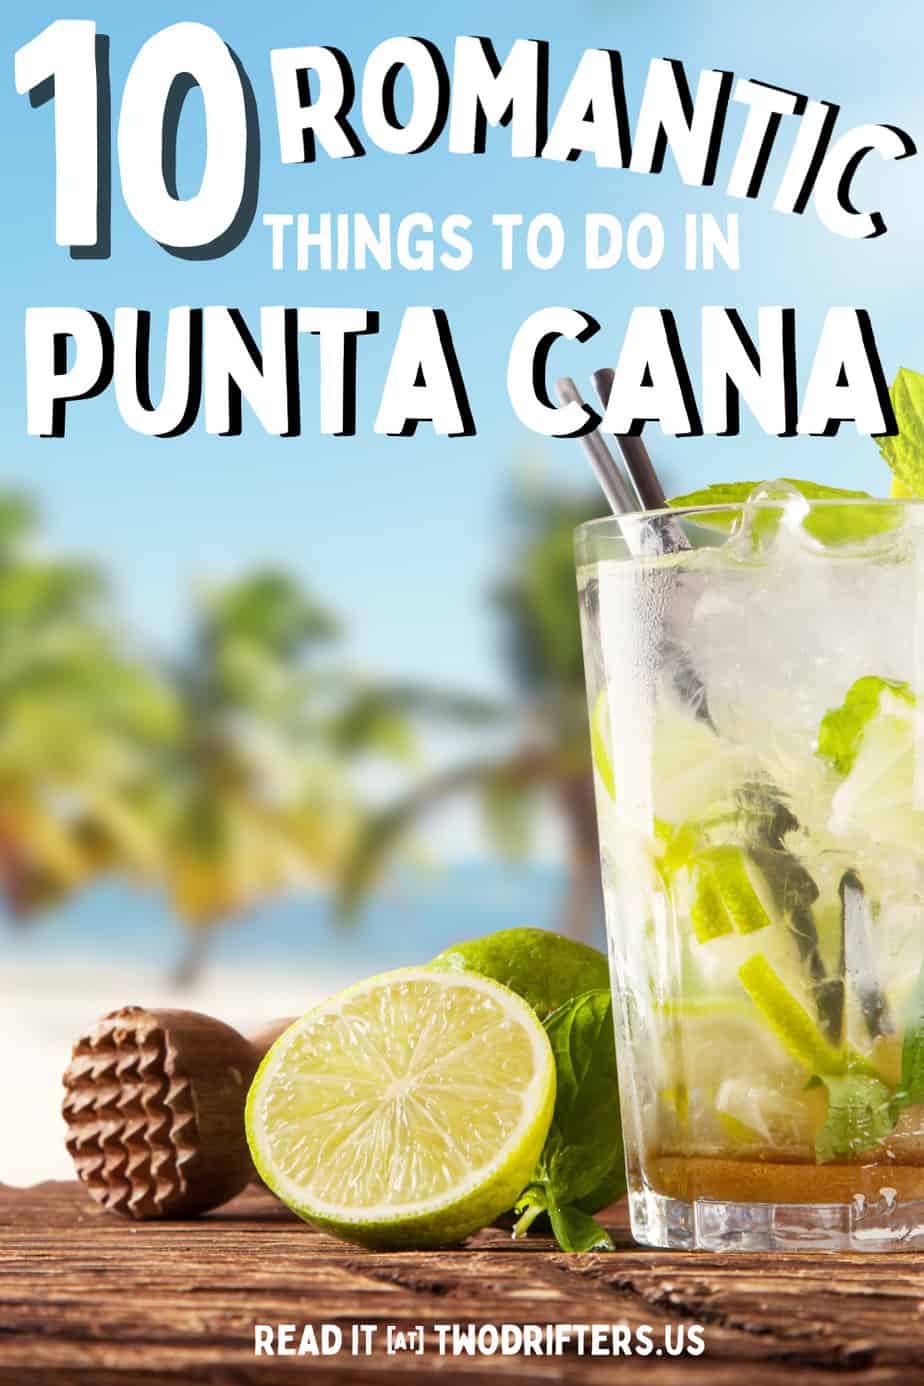 Pinterest social share image that says "10 Romantic Things to do in Punta Cana."